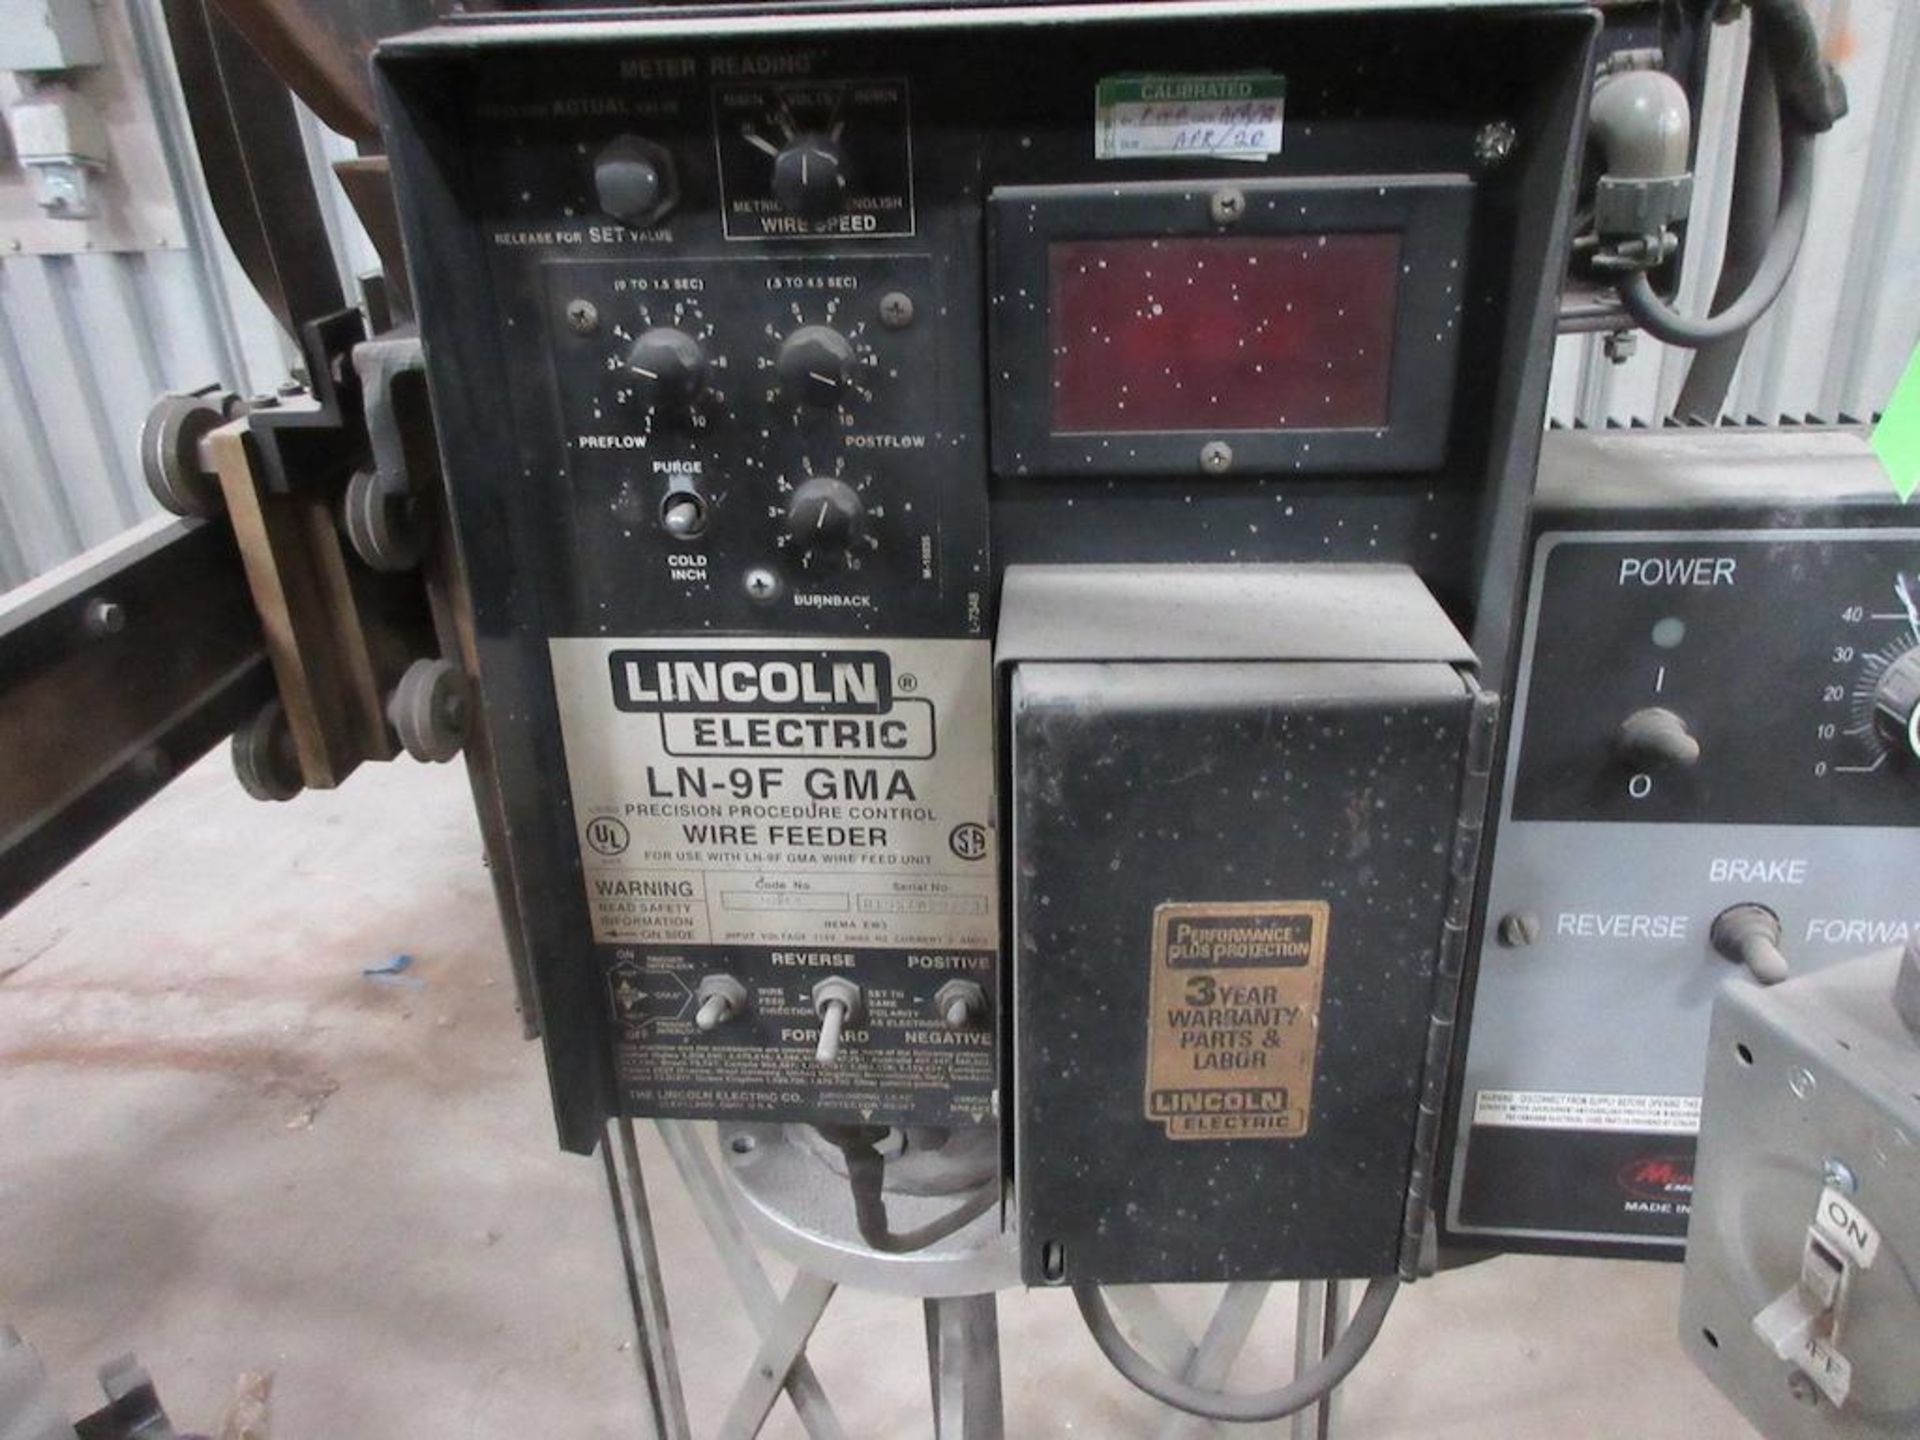 LINCOLN ELECTRIC CIRCLE WELDER FIXTURE W LN-9F GMA WIRE FEEDER (WELD POWER SOURCE NOT INCLUDED) - Image 2 of 2